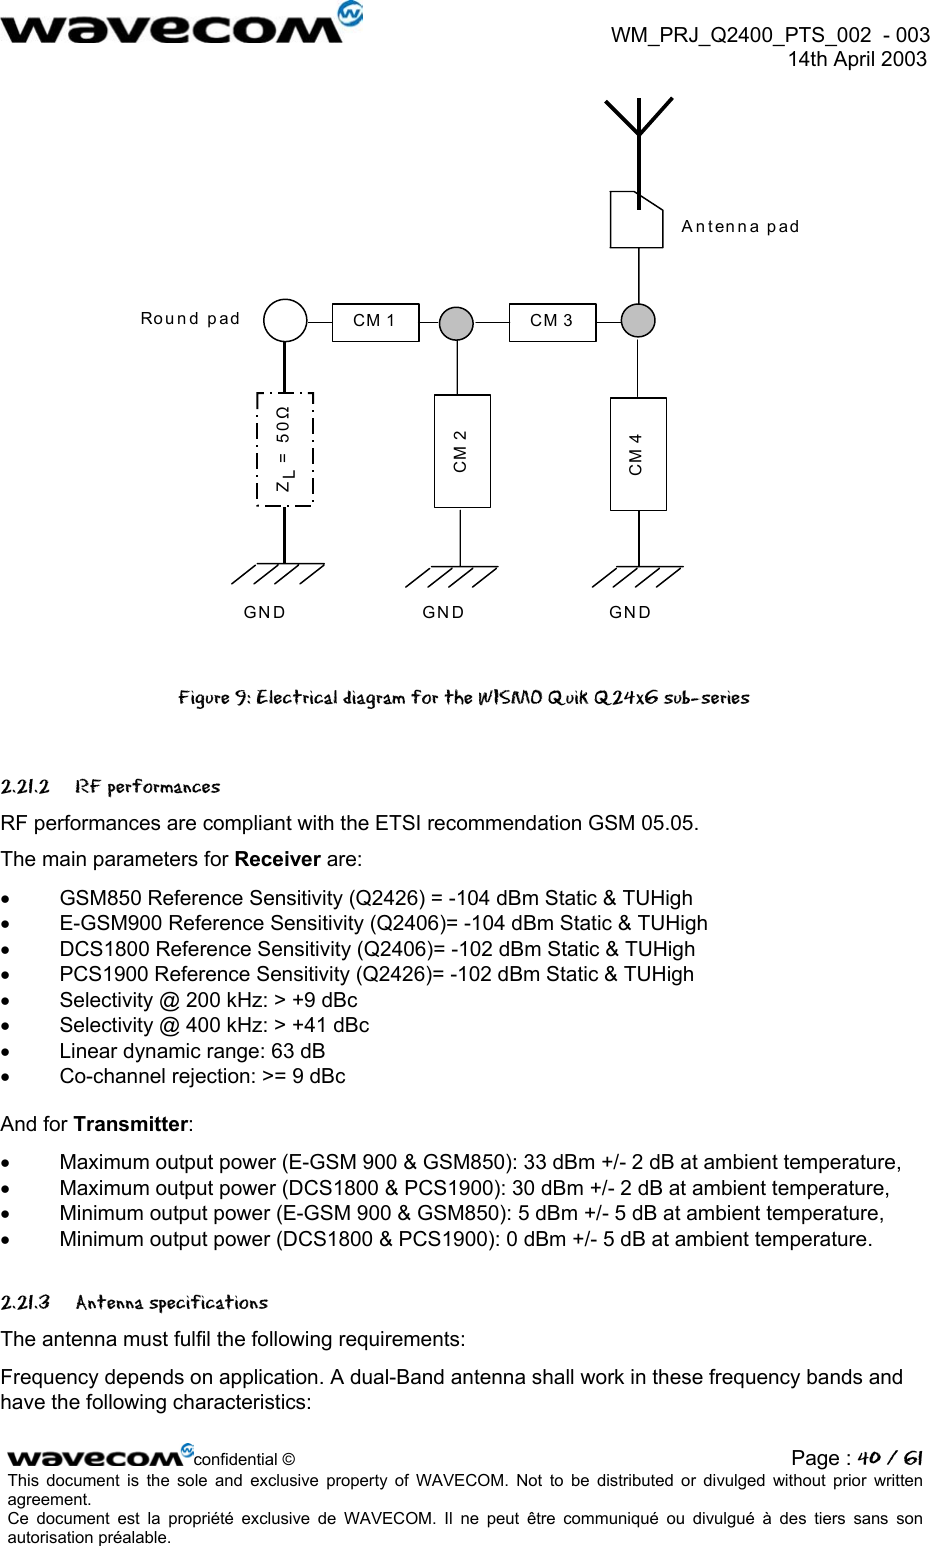  WM_PRJ_Q2400_PTS_002  - 003  14th April 2003    Antenna pad GND GND GNDCM 1 CM 3Round padCM 2 CM 4 ZL = 50Ω   Figure 9: Electrical diagram for the WISMO Quik Q24x6 sub-series  2.21.2 RF performances RF performances are compliant with the ETSI recommendation GSM 05.05. The main parameters for Receiver are:  •  GSM850 Reference Sensitivity (Q2426) = -104 dBm Static &amp; TUHigh •  E-GSM900 Reference Sensitivity (Q2406)= -104 dBm Static &amp; TUHigh •  DCS1800 Reference Sensitivity (Q2406)= -102 dBm Static &amp; TUHigh •  PCS1900 Reference Sensitivity (Q2426)= -102 dBm Static &amp; TUHigh •  Selectivity @ 200 kHz: &gt; +9 dBc  •  Selectivity @ 400 kHz: &gt; +41 dBc •  Linear dynamic range: 63 dB •  Co-channel rejection: &gt;= 9 dBc  And for Transmitter: •  Maximum output power (E-GSM 900 &amp; GSM850): 33 dBm +/- 2 dB at ambient temperature, •  Maximum output power (DCS1800 &amp; PCS1900): 30 dBm +/- 2 dB at ambient temperature, •  Minimum output power (E-GSM 900 &amp; GSM850): 5 dBm +/- 5 dB at ambient temperature, •  Minimum output power (DCS1800 &amp; PCS1900): 0 dBm +/- 5 dB at ambient temperature. 2.21.3 Antenna specifications The antenna must fulfil the following requirements: Frequency depends on application. A dual-Band antenna shall work in these frequency bands and have the following characteristics: confidential © Page : 40 / 61This document is the sole and exclusive property of WAVECOM. Not to be distributed or divulged without prior written agreement.  Ce document est la propriété exclusive de WAVECOM. Il ne peut être communiqué ou divulgué à des tiers sans son autorisation préalable.  